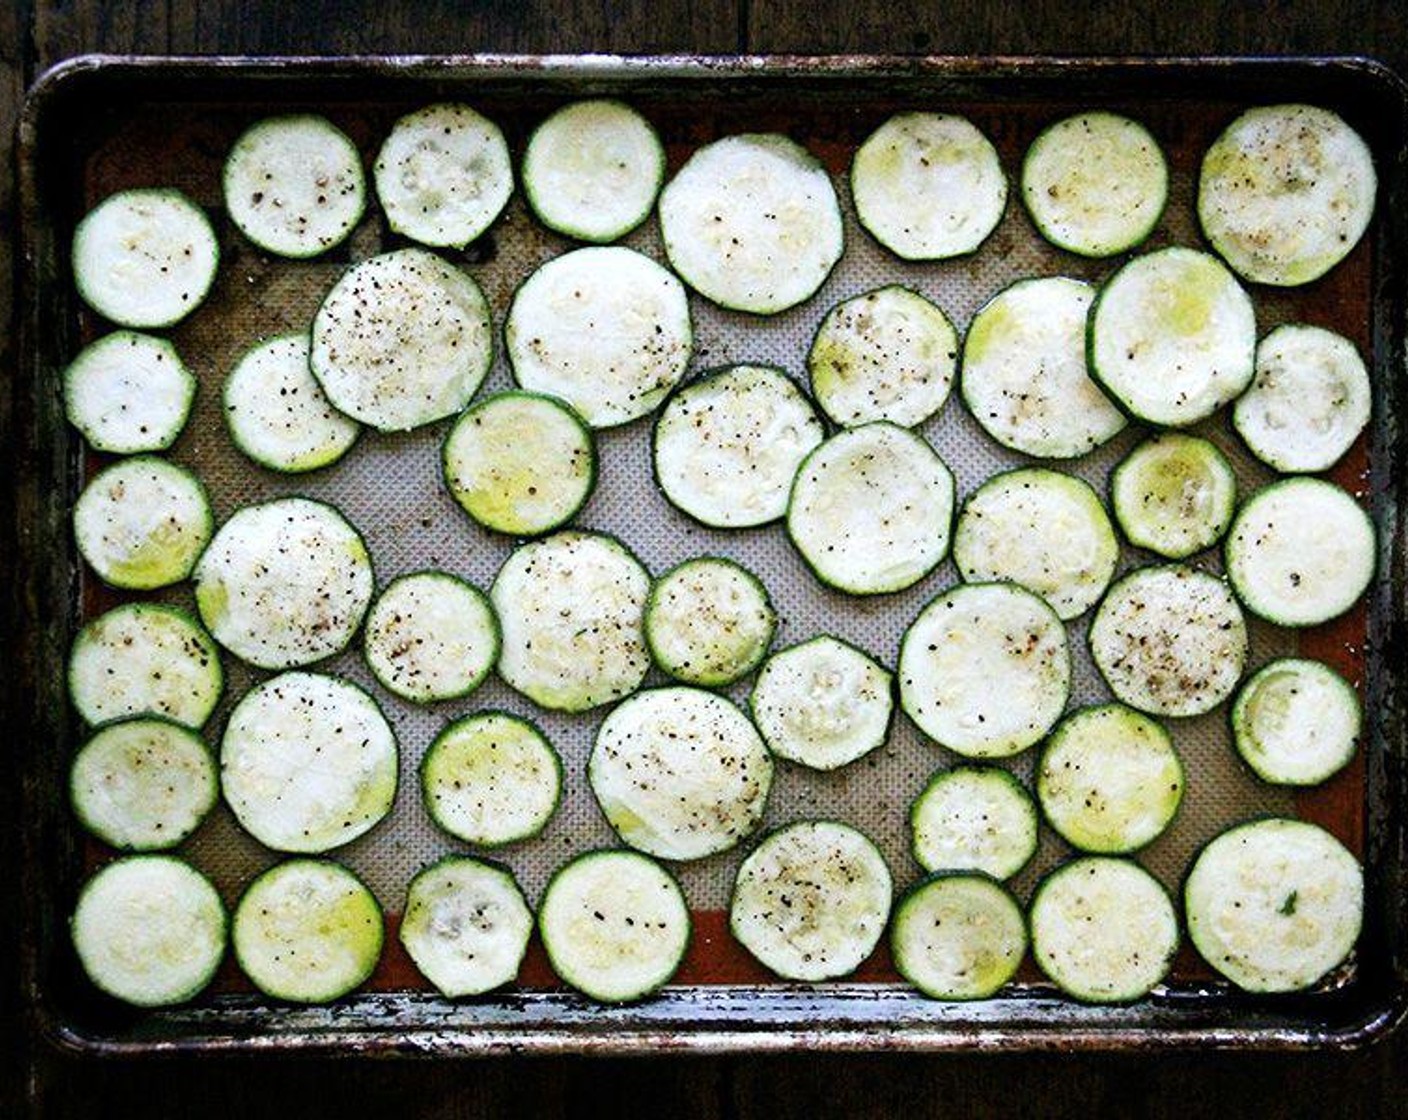 step 2 Arrange the Zucchini (7 cups) in single layers on two Silat or parchment-lined rimmed sheet pans. Season with Kosher Salt (to taste) and Freshly Ground Black Pepper (to taste) on each side, drizzle each pan with Extra-Virgin Olive Oil (2 Tbsp), toss to coat, then spread into an even layer.